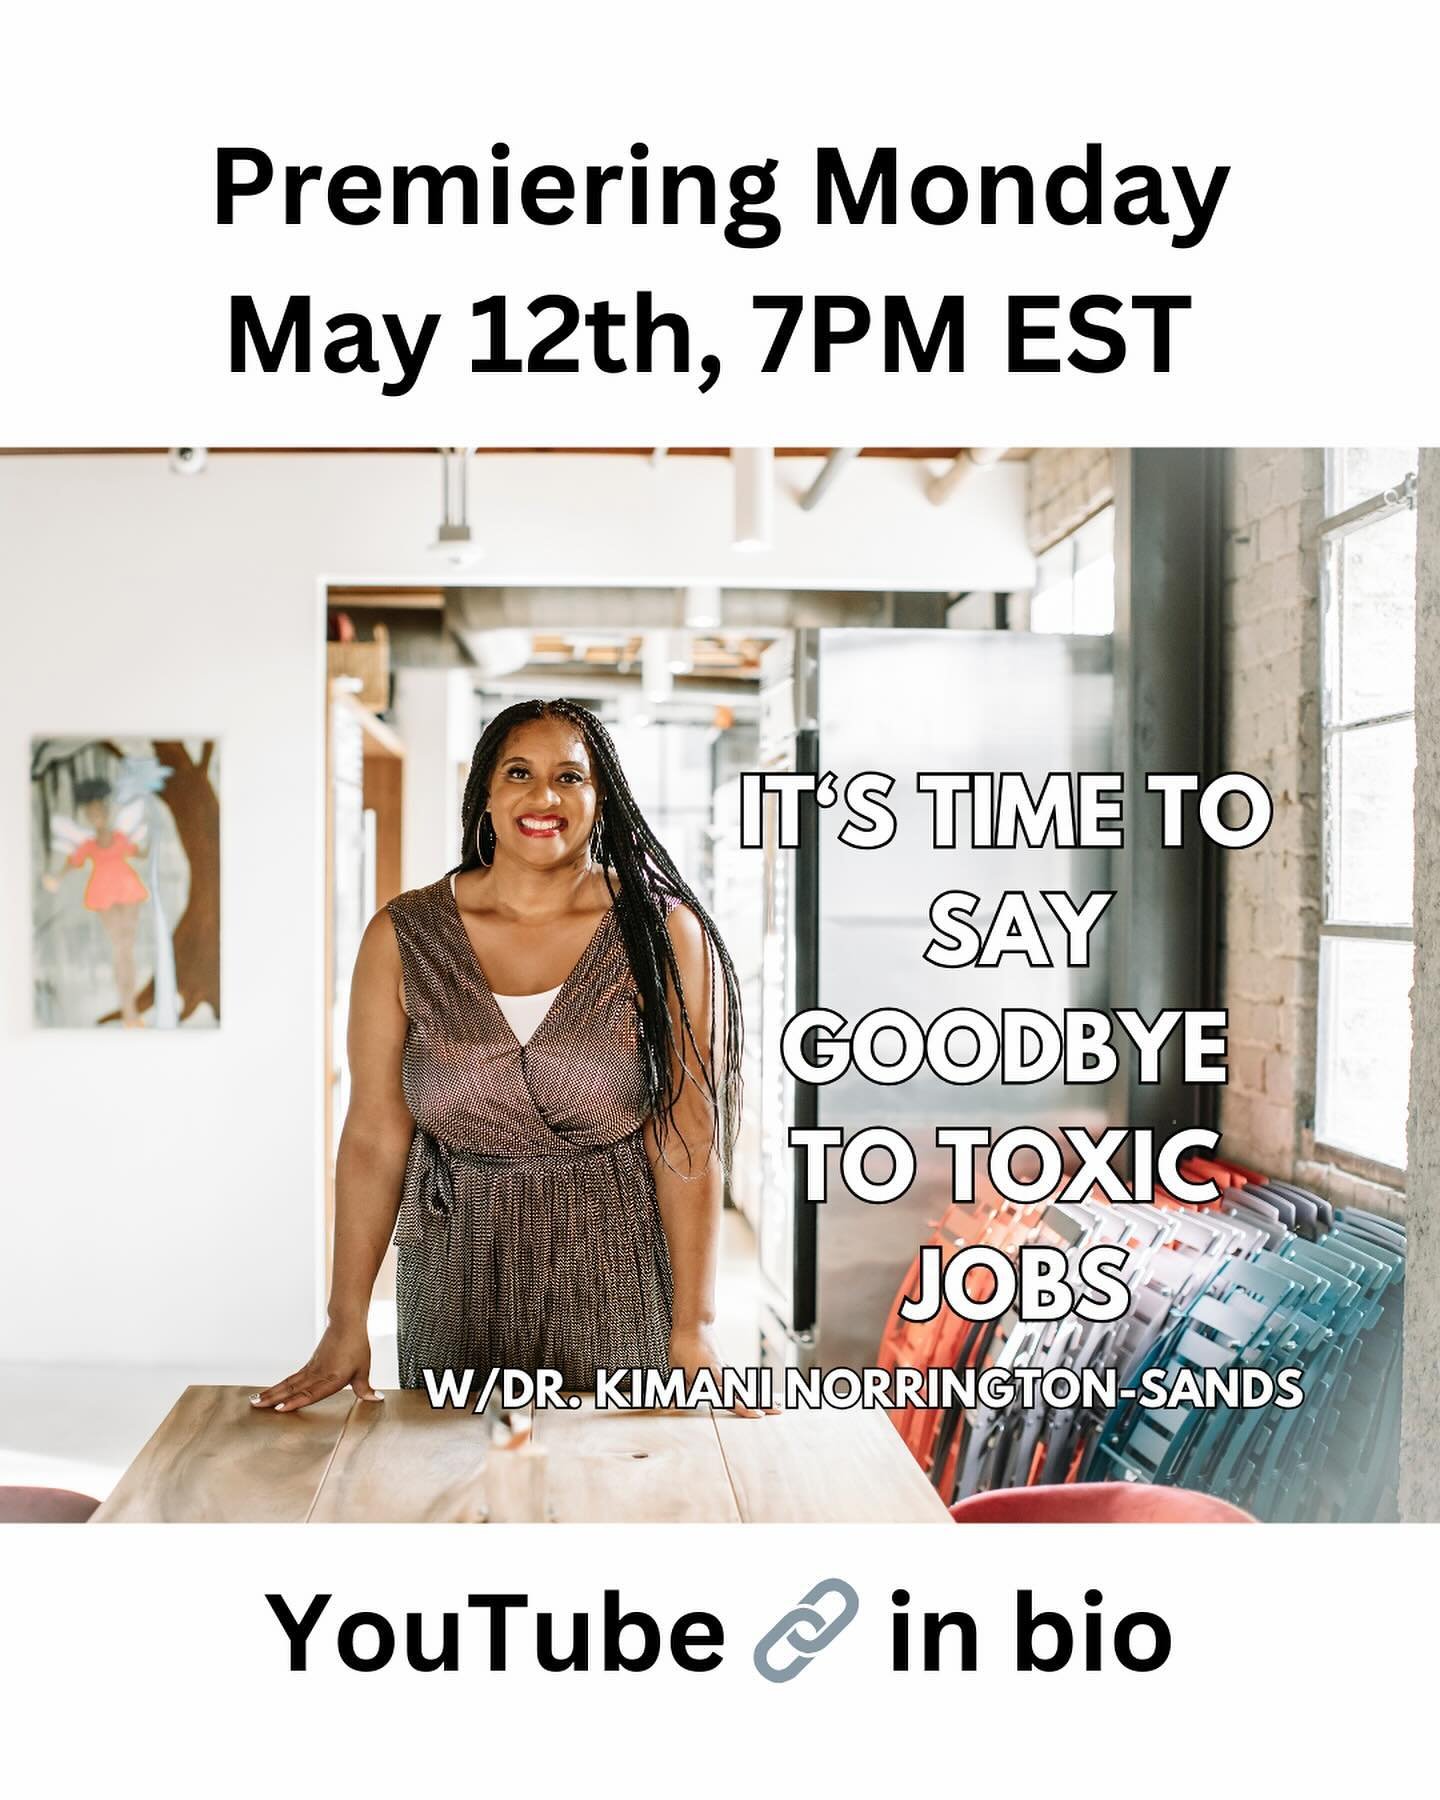 It&rsquo;s Monday again☺️! Join me tonight over on YouTube to watch my interview with Dr. Kimani of @liftingasweclimbconsulting where we discuss toxic jobs and how Black women can start to get FREE from them through resources such as the Job Liberati